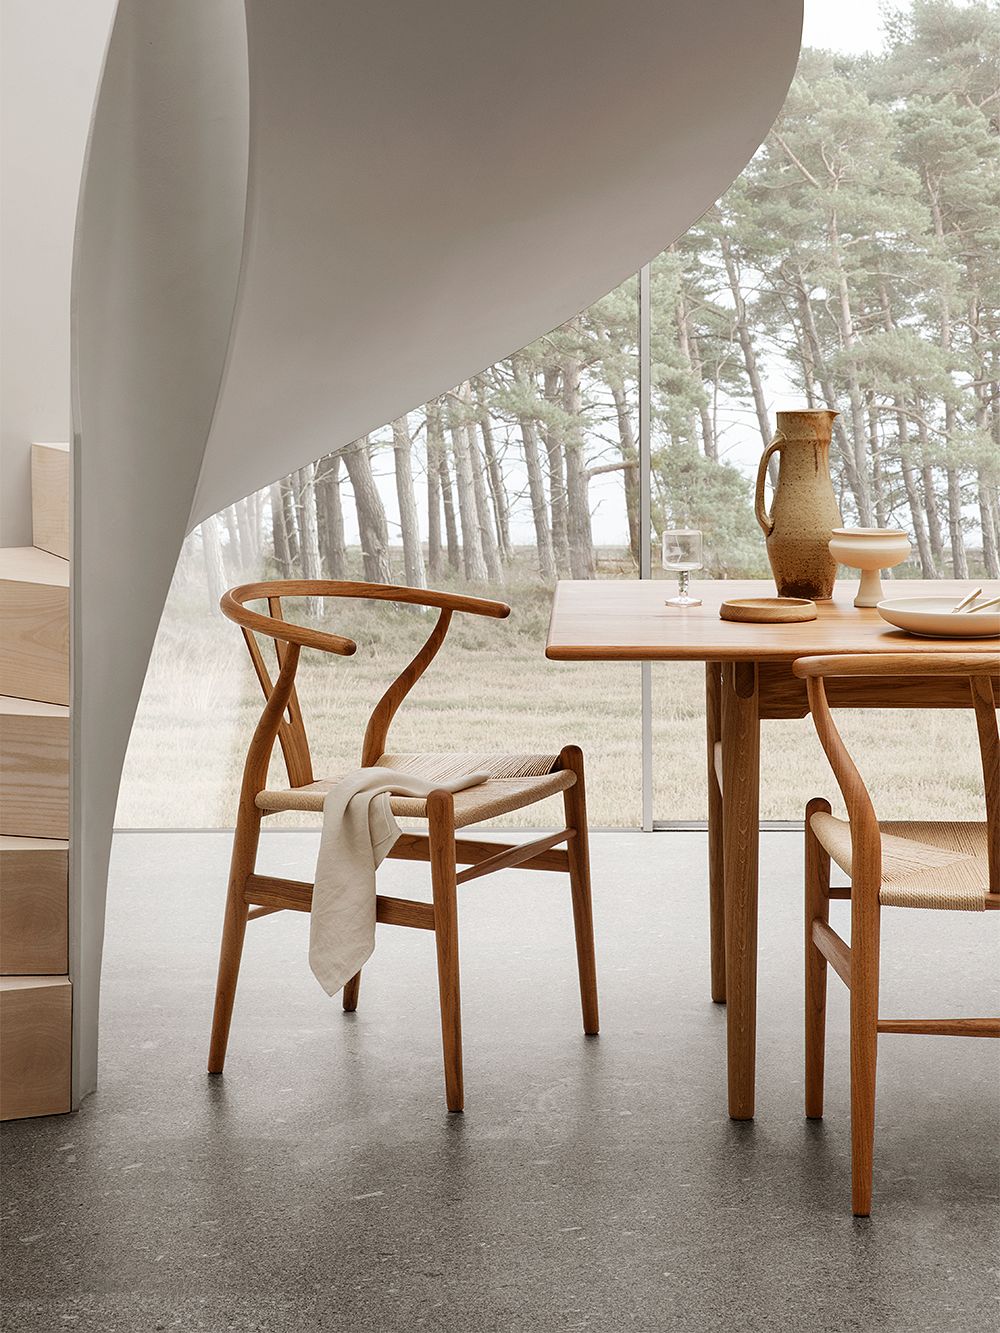 An image featuring Carl Hansen & Søn's CH24 or Wishbone chair as part of the dining room decor.